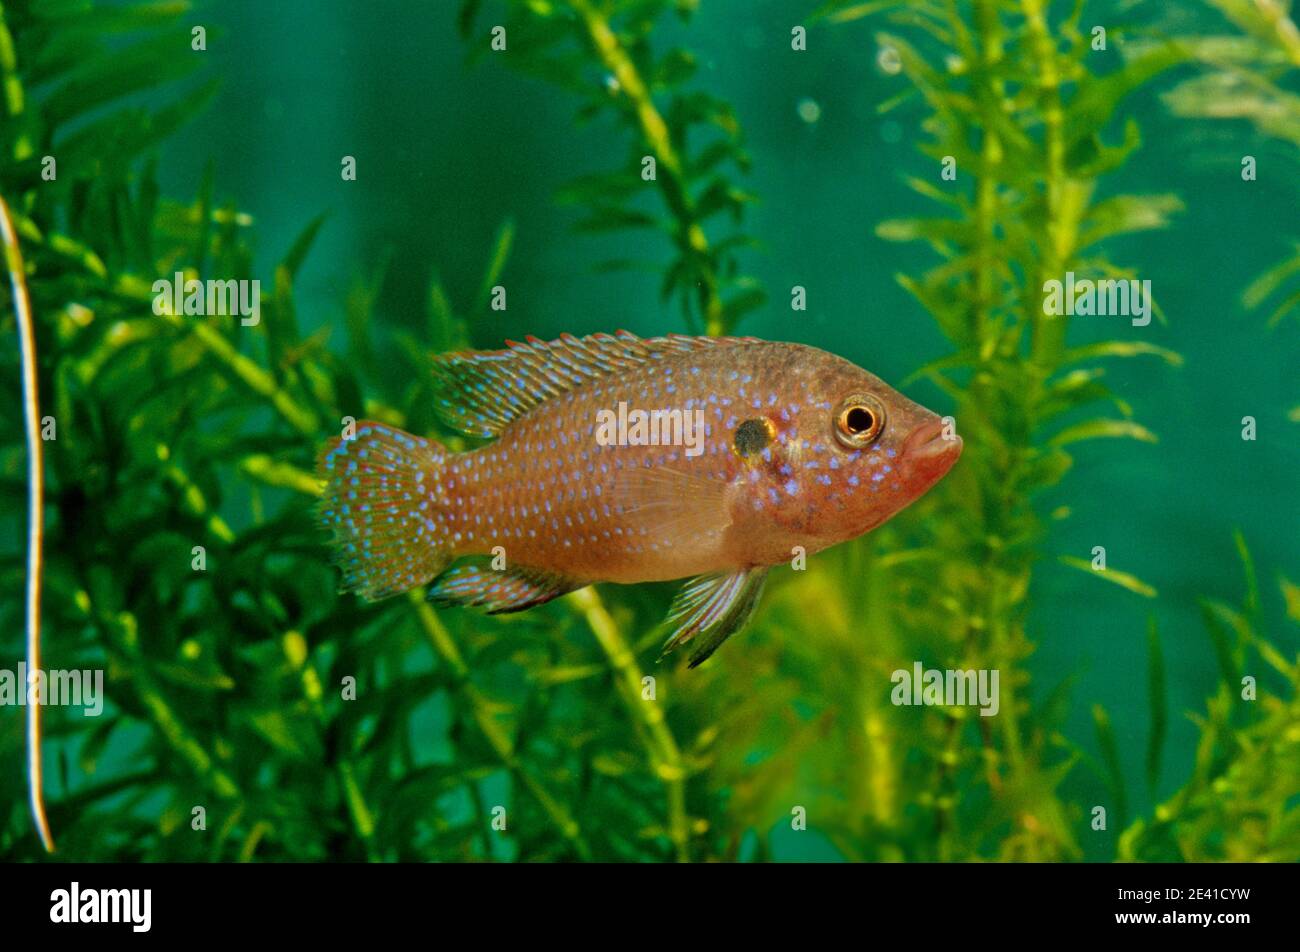 Hemichromis lifalili, common name blood-red jewel cichlid, is a species of fish in the family Cichlidae. Stock Photo